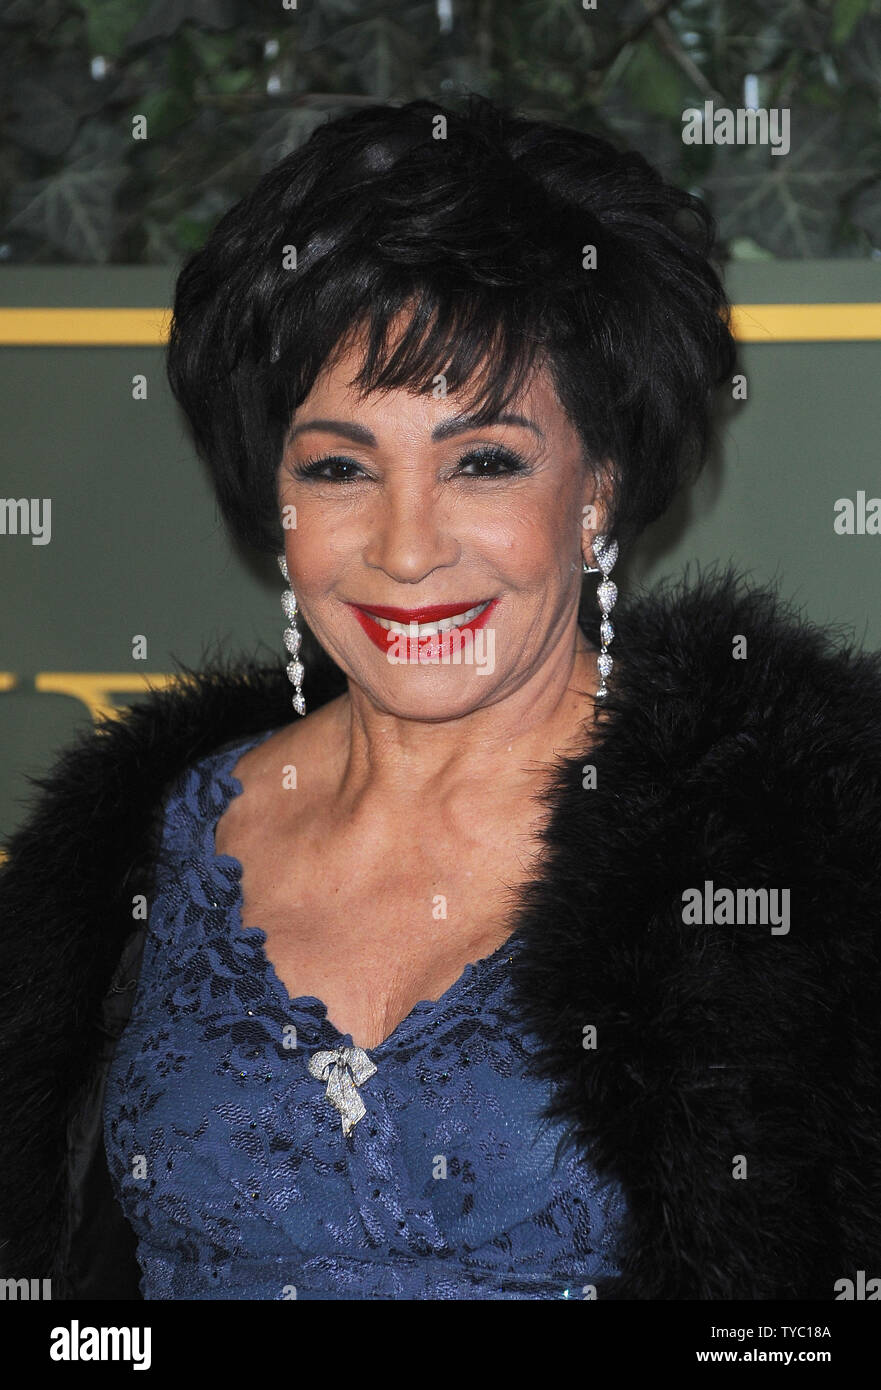 Welsh singer Shirley Bassey attends the 'Evening Standard Theatre Awards' at The Old Vic in London on November 21, 2015. Photo by Paul Treadway/UPI Stock Photo